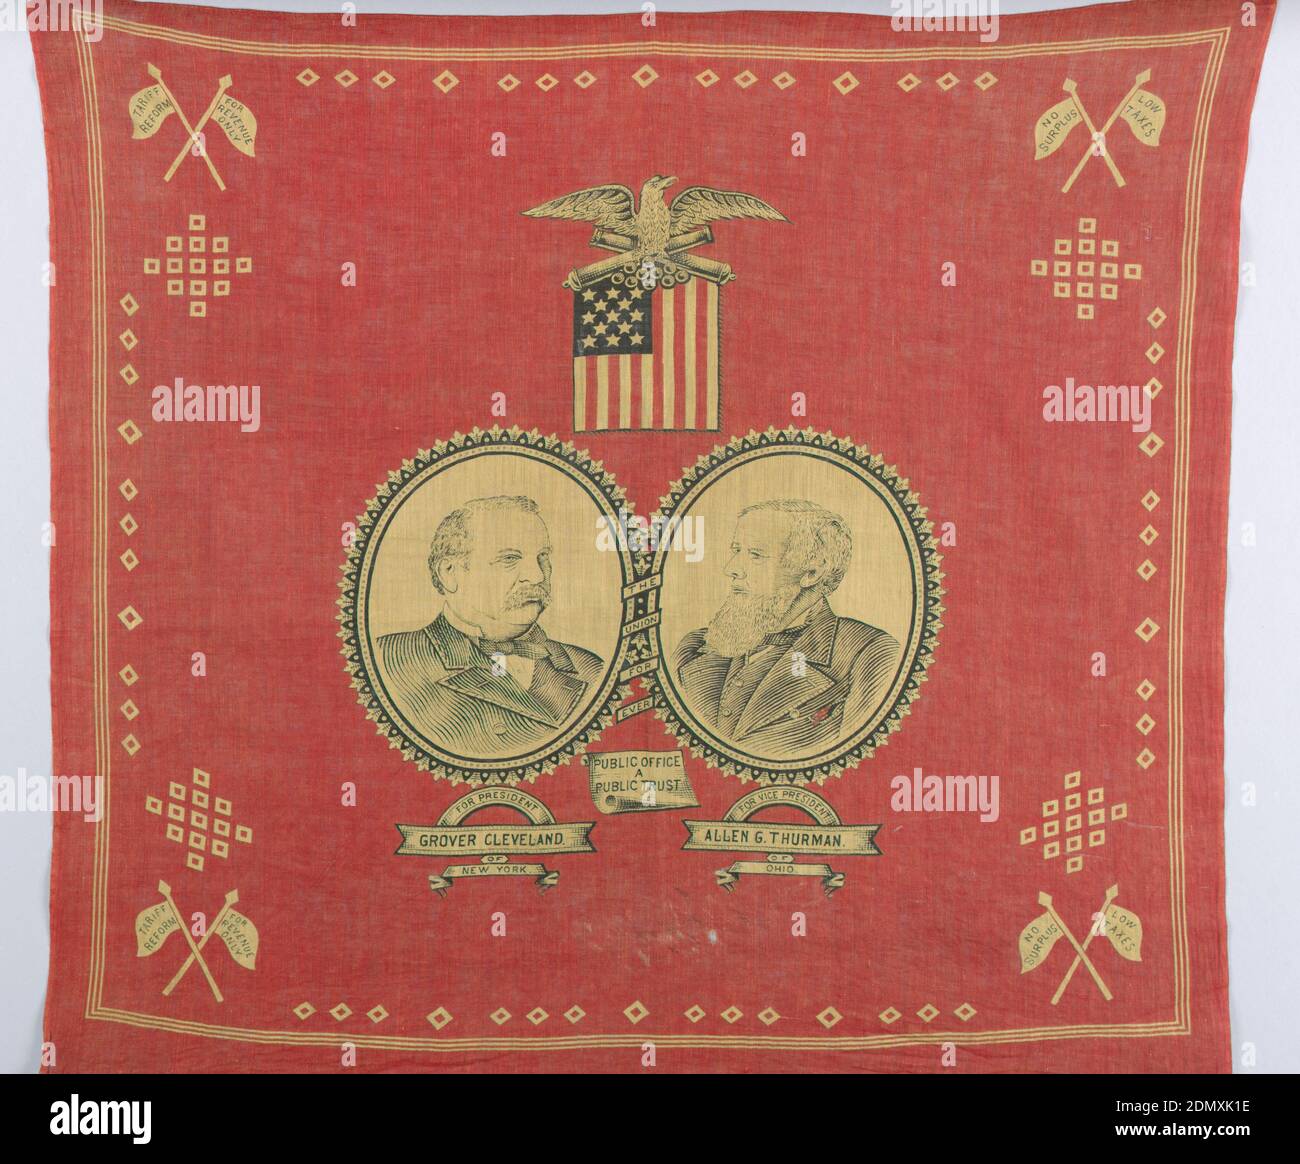 Handkerchief, Medium: cotton Technique: printed on plain weave, Red campaign handkerchief has two central portrait medallions containing presidential candidate Grover Cleveland and vice presidential candidate Allen G. Thurman. Above the medallions is an American flag with an eagle perched over two cannons and a mound of cannonballs. Crossed yellow flags in each corner have messages: Tariff Reform, For Revenue Only and No Surplus, Low Taxes. Portrait medallions are connected with four separate bands containing: The Union For Ever. Below is a banner proclaiming: Public Office A Public Trust Stock Photo